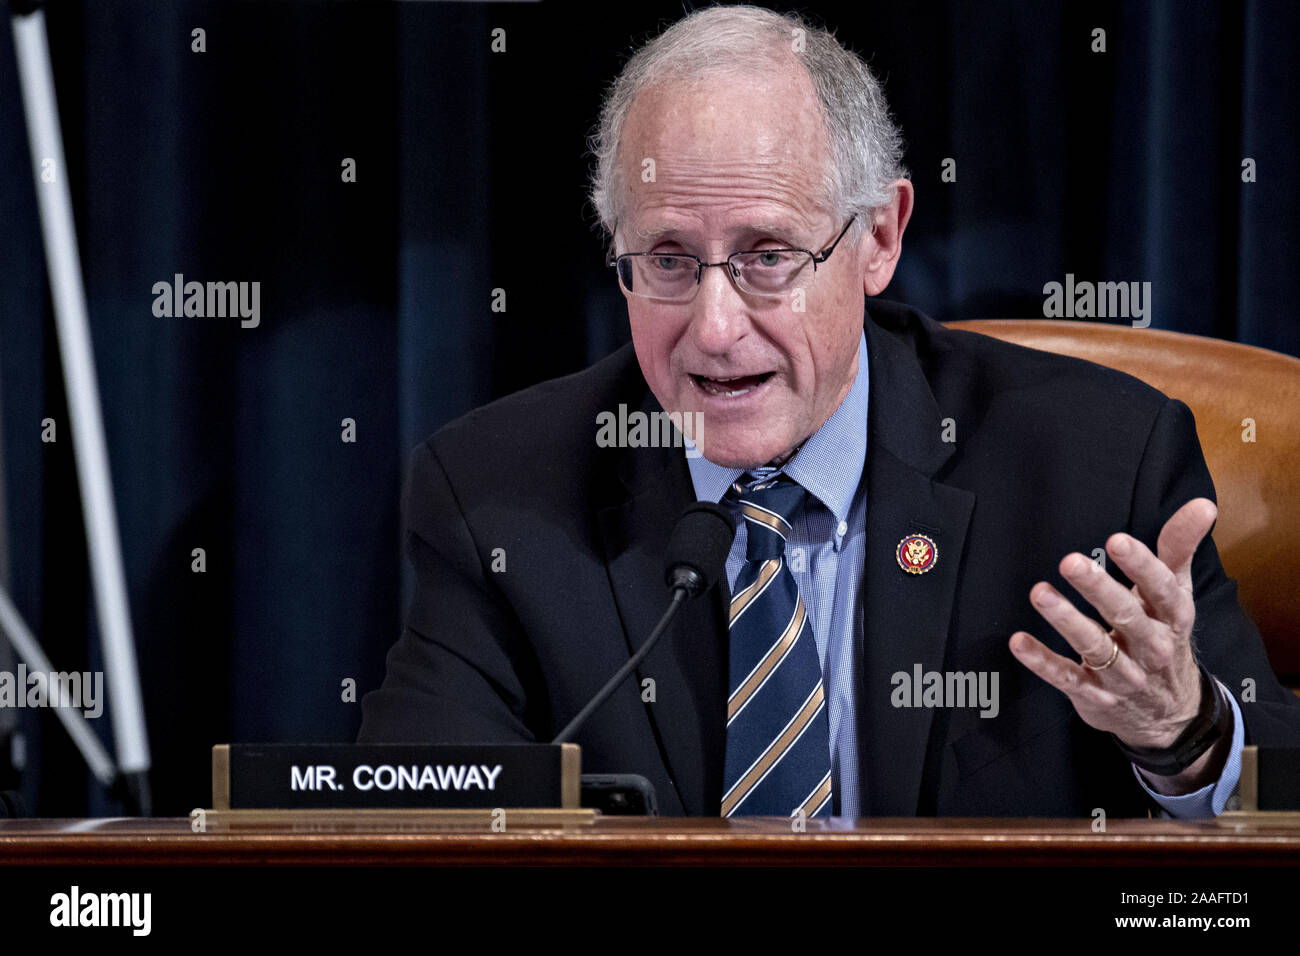 Washington, United States. 21st Nov, 2019. Representative Mike Conaway, a Republican from Texas, questions witnesses during a House Intelligence Committee impeachment inquiry hearing in Washington, DC, U.S., on Thursday, Nov. 21, 2019. The committee hears from nine witnesses in open hearings this week in the impeachment inquiry into President Donald Trump. Credit: UPI/Alamy Live News Stock Photo